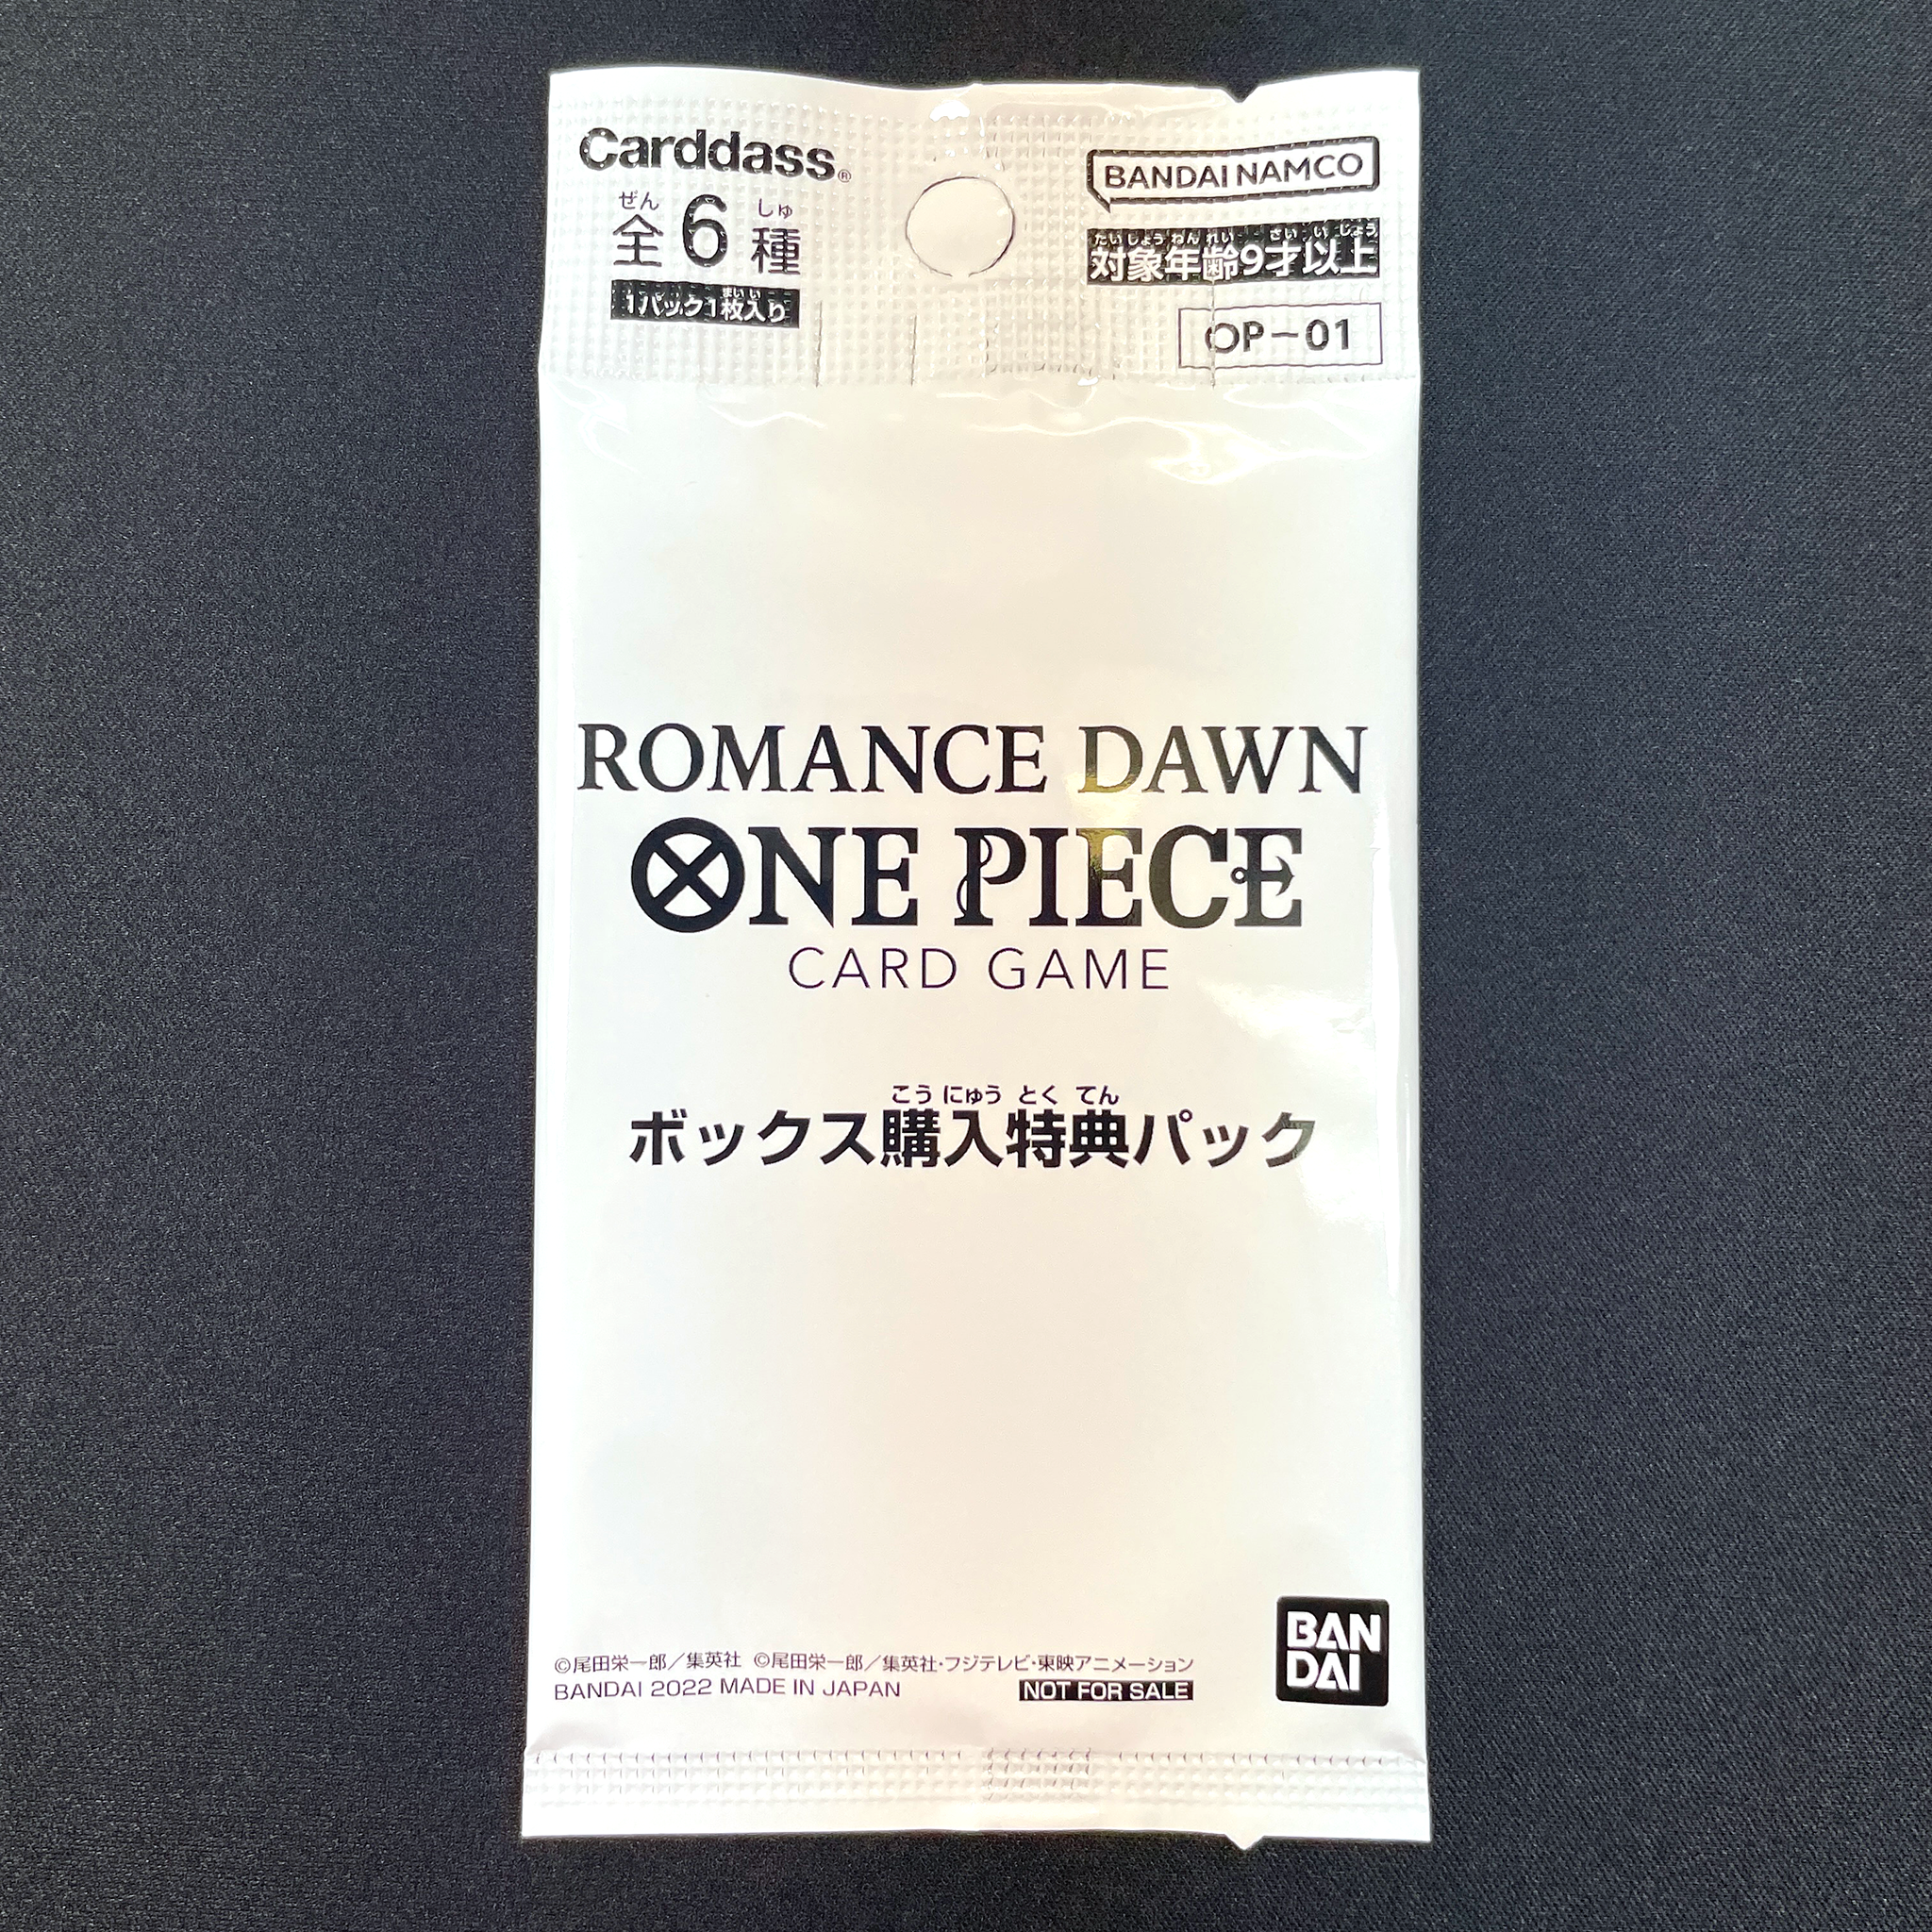 ONE PIECE CARD GAME ｢ROMANCE DAWN｣  ONE PIECE CARD GAME OP01 Box Kounyuu Tokuten Pack  The pack contains one OP01 parallel card among 6 different ones.  The card can be:      OP01-008 Parallel     OP01-034 Parallel     OP01-048 Parallel     OP01-064 Parallel     OP01-077 Parallel     OP01-109 Parallel